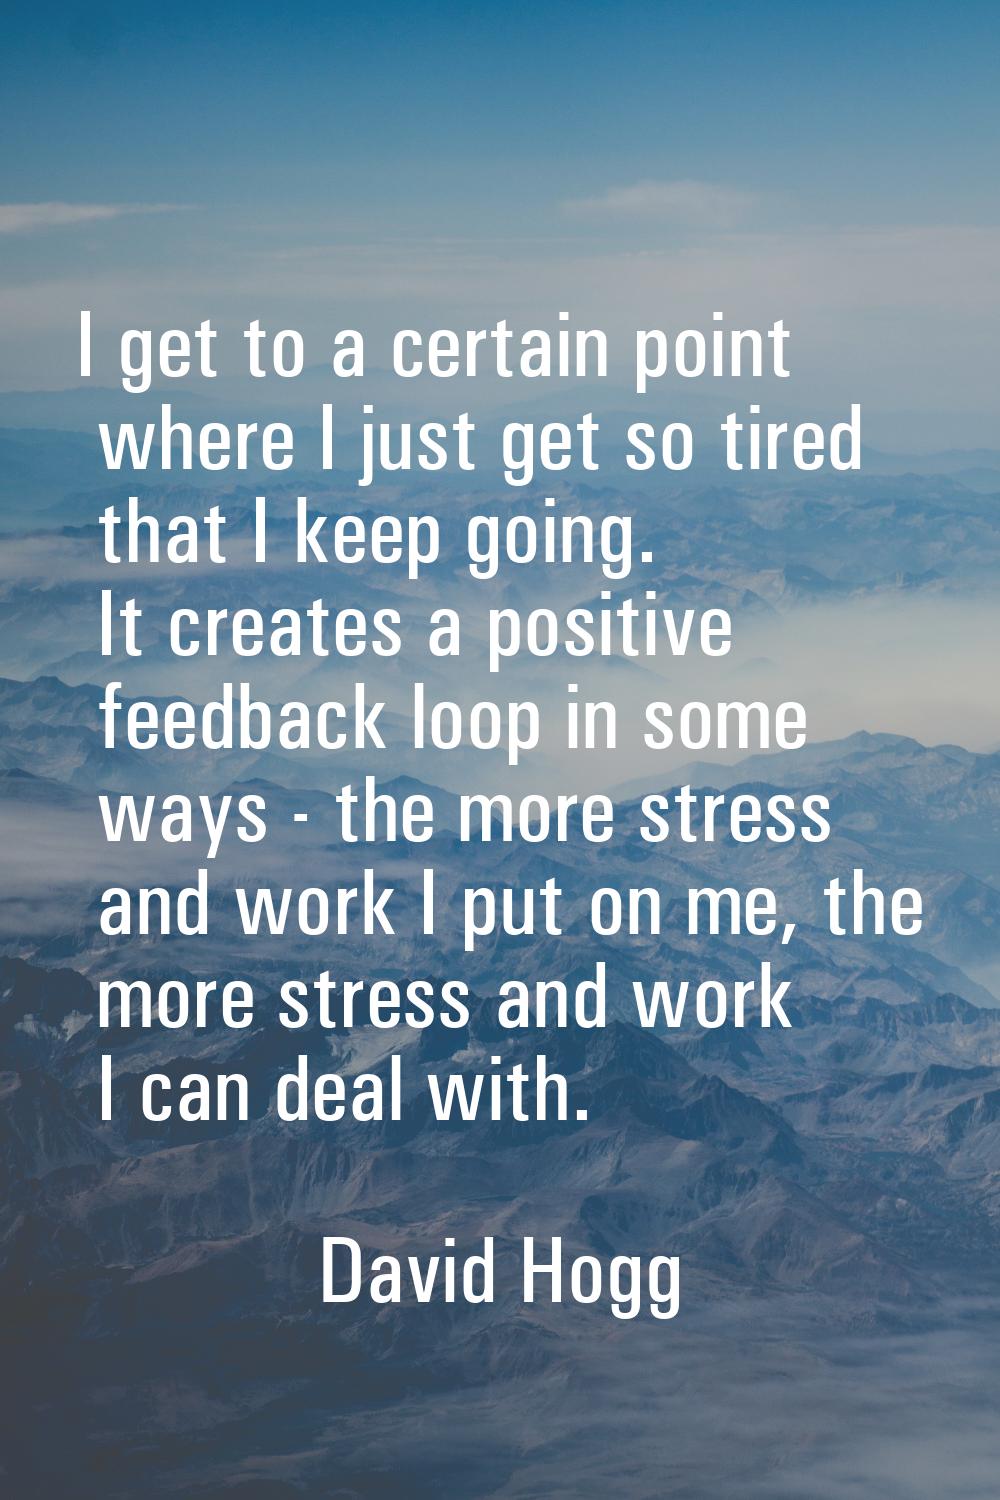 I get to a certain point where I just get so tired that I keep going. It creates a positive feedbac